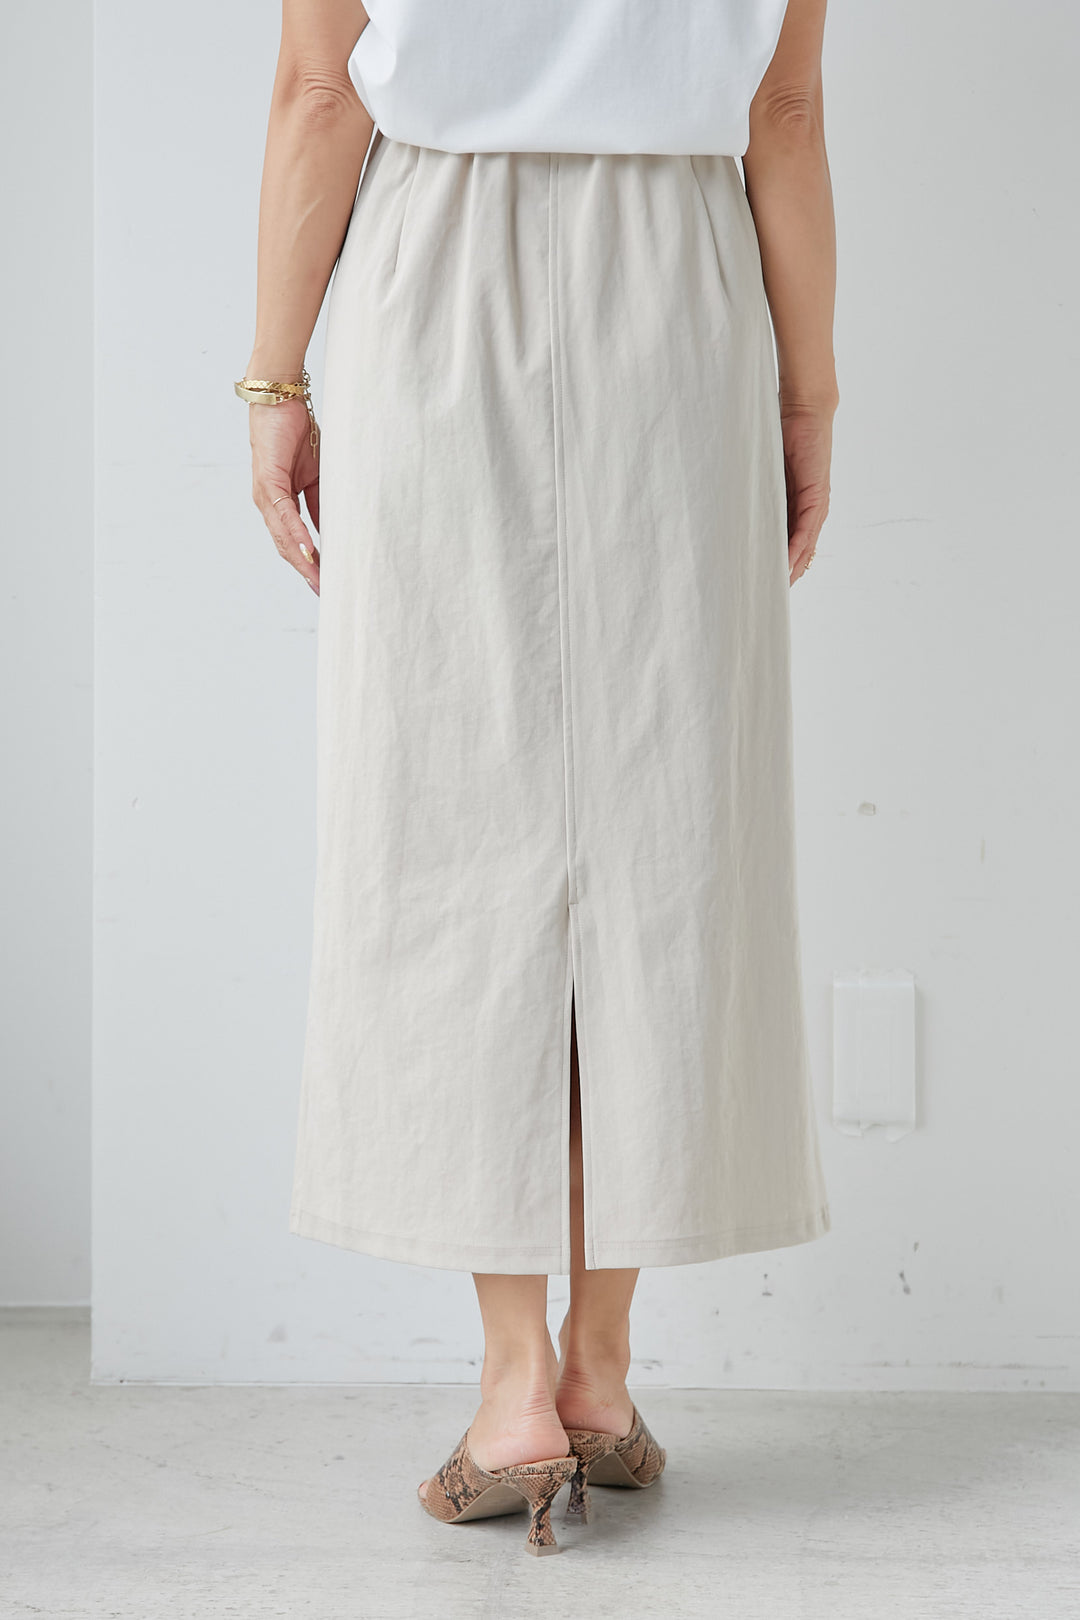 [Cool to the touch, water repellent] Waist tuck skirt